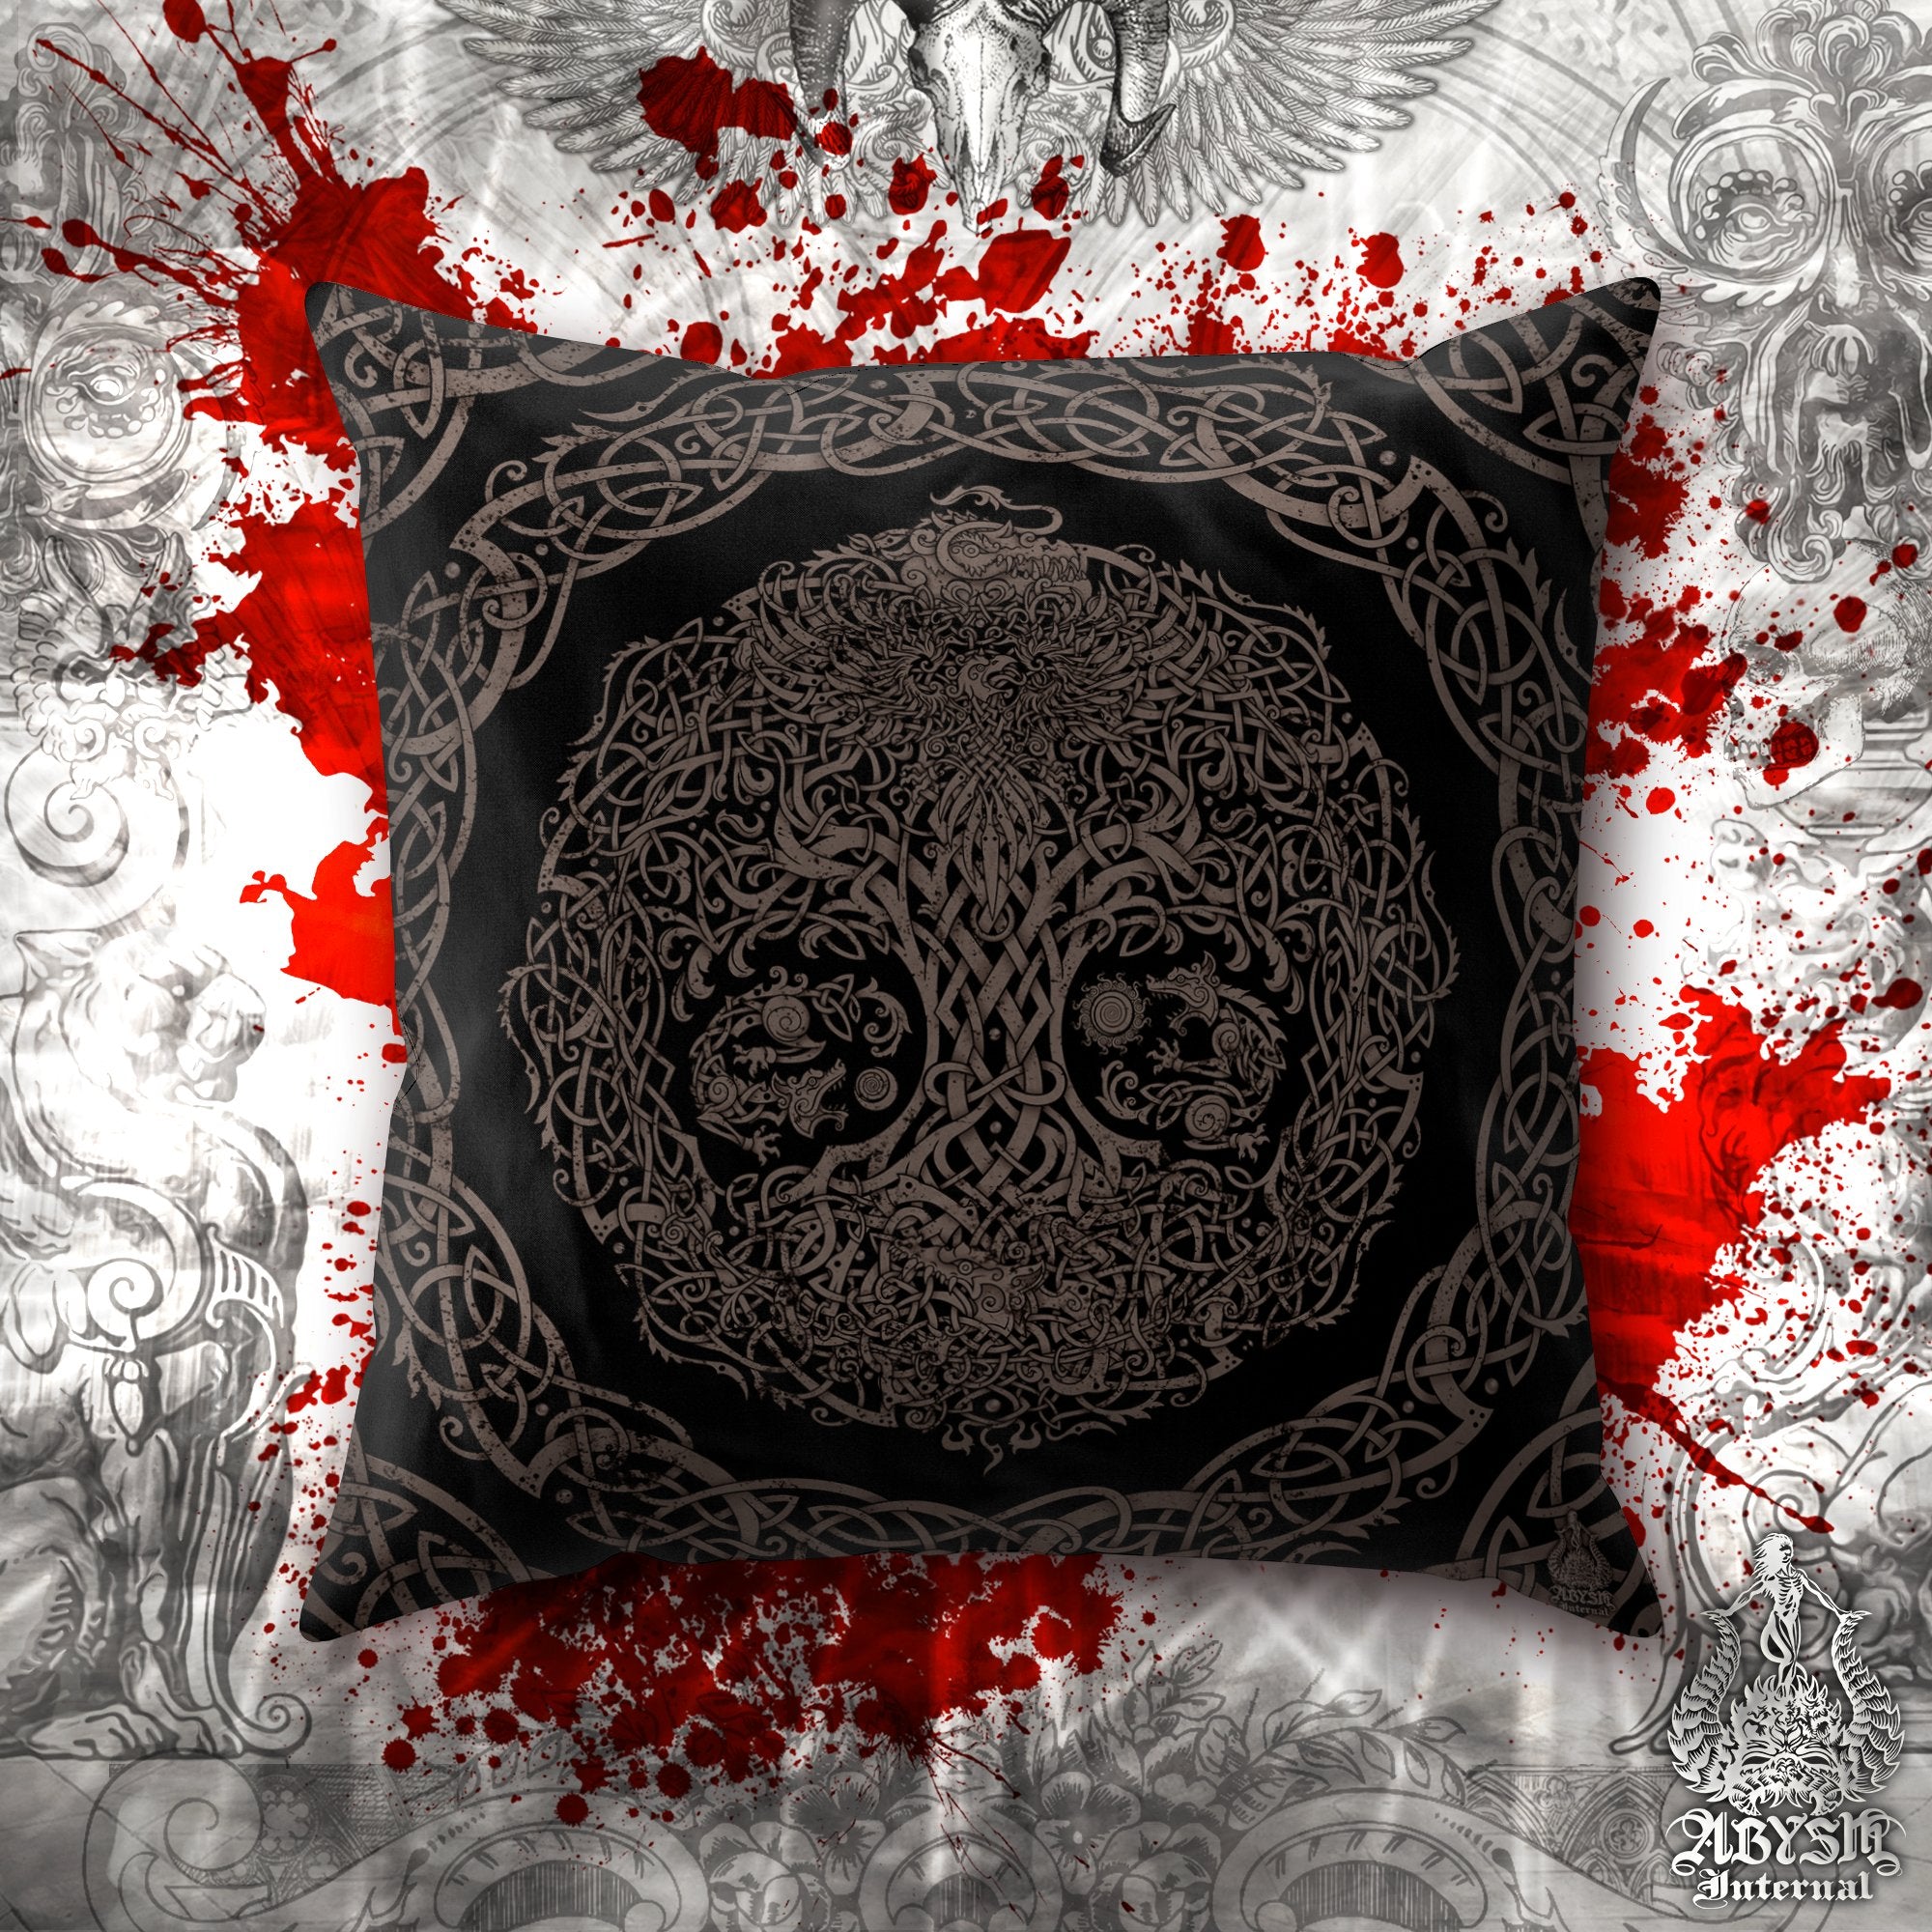 Yggdrasil Throw Pillow, Decorative Accent Pillow, Square Cushion Cover, Viking Mythology, Norse Home Decor, Nordic Art - Tree of Life, Black Grey Grit - Abysm Internal